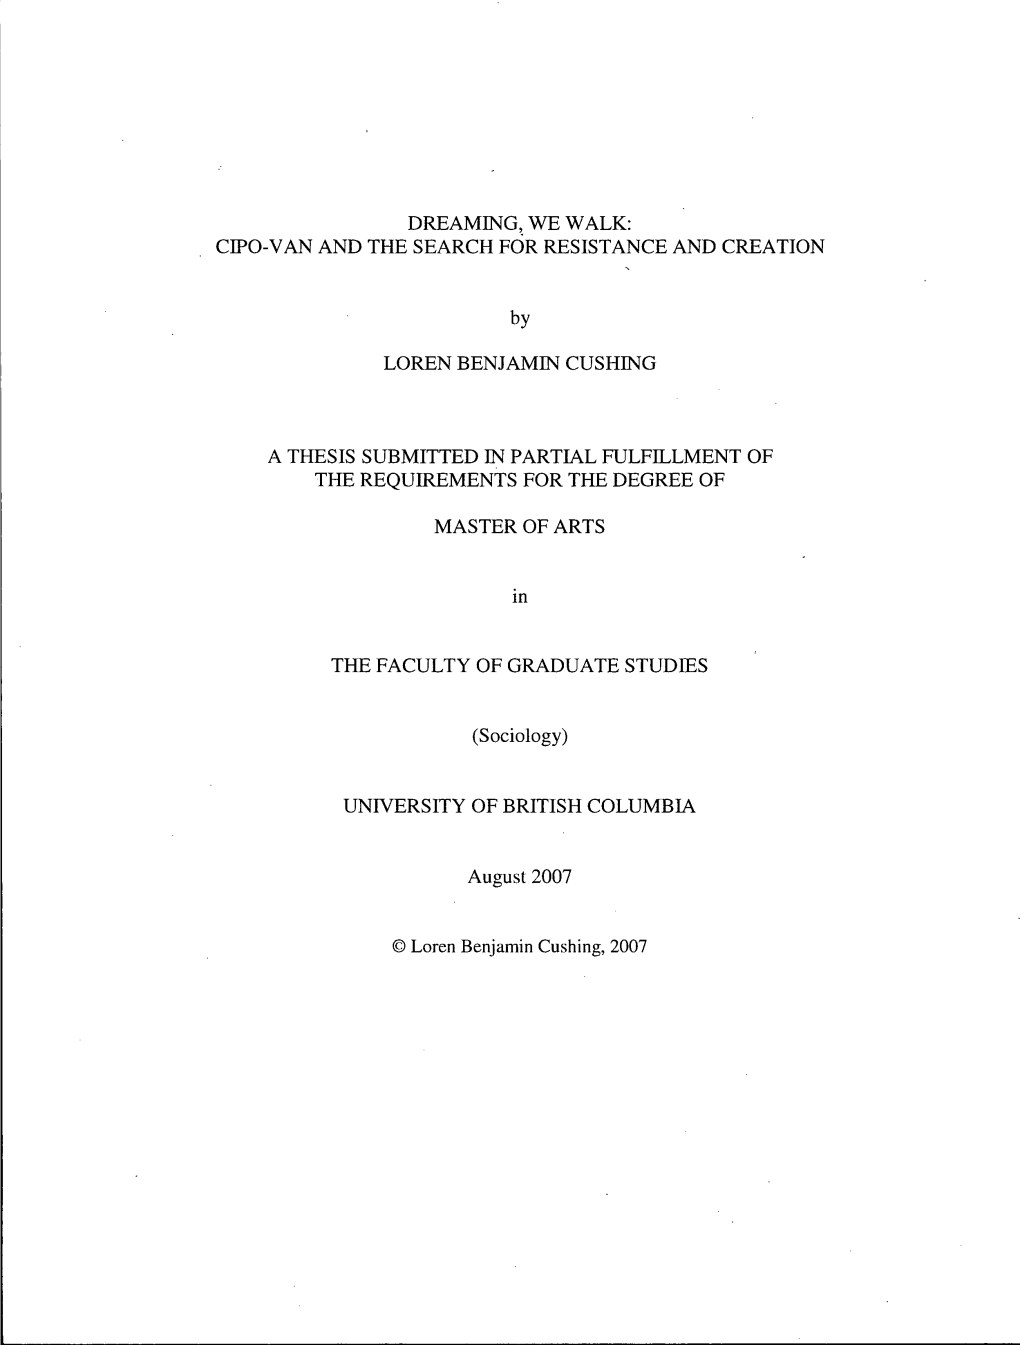 CIPO-VAN and the SEARCH for RESISTANCE and CREATION by LOREN BENJAMIN CUSHING a THESIS SUBMITTED in PARTIAL F